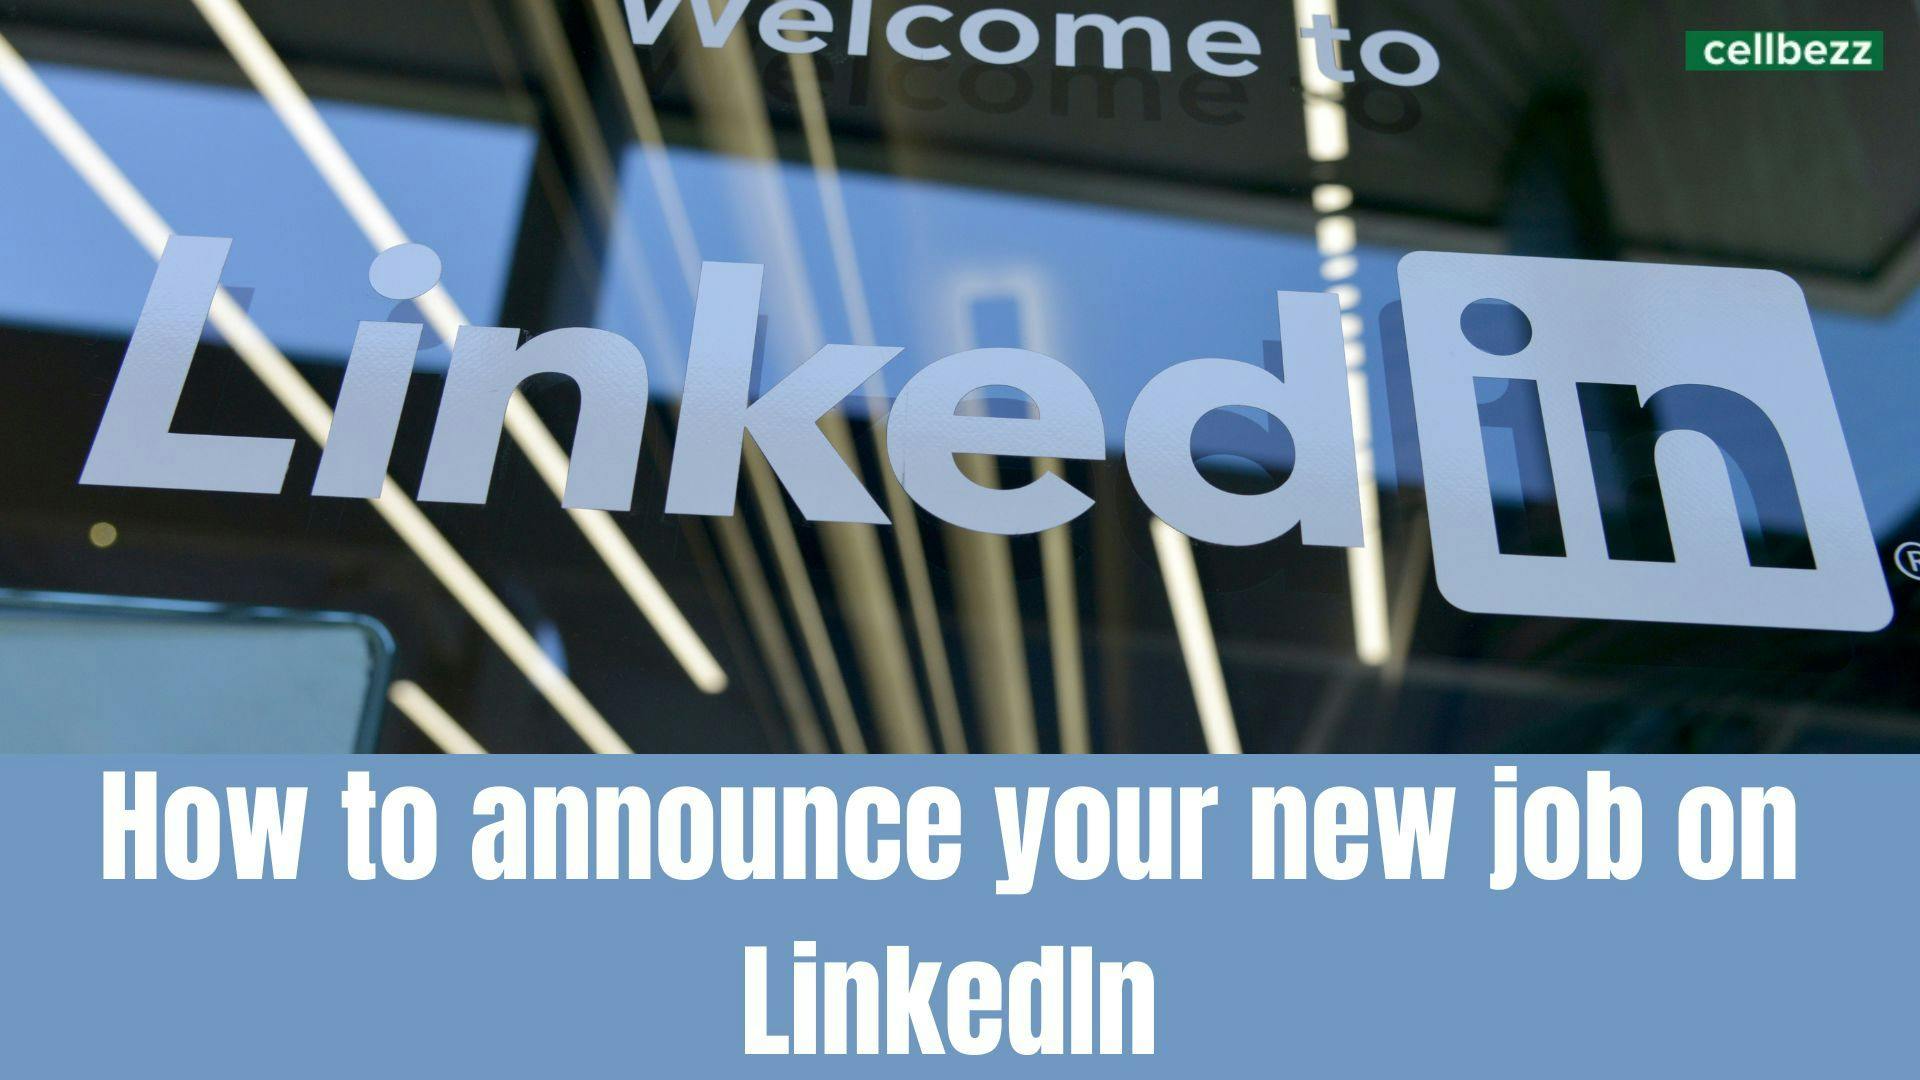 How to announce your new job on LinkedIn featured image 